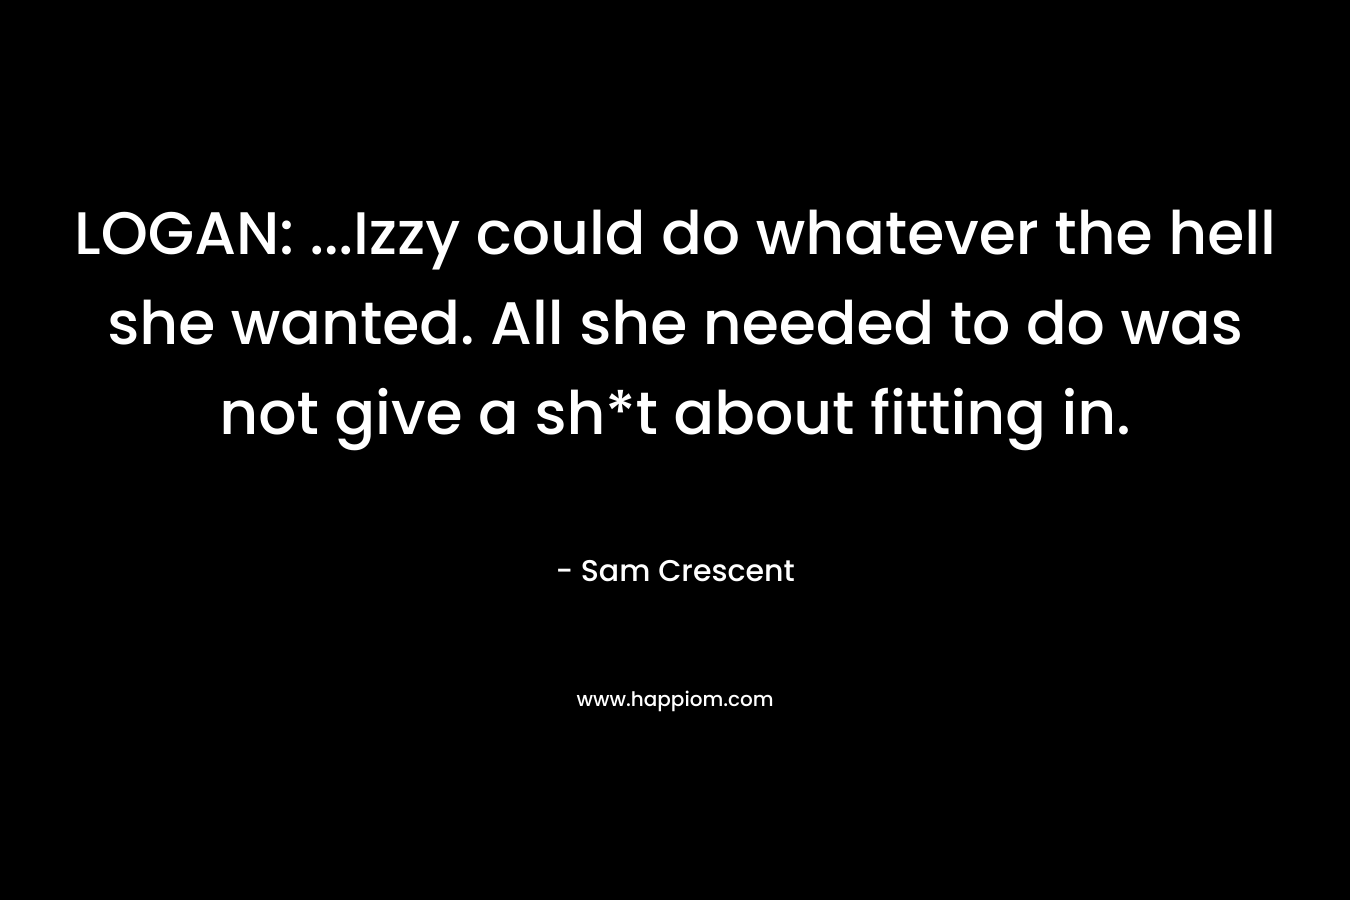 LOGAN: …Izzy could do whatever the hell she wanted. All she needed to do was not give a sh*t about fitting in. – Sam Crescent